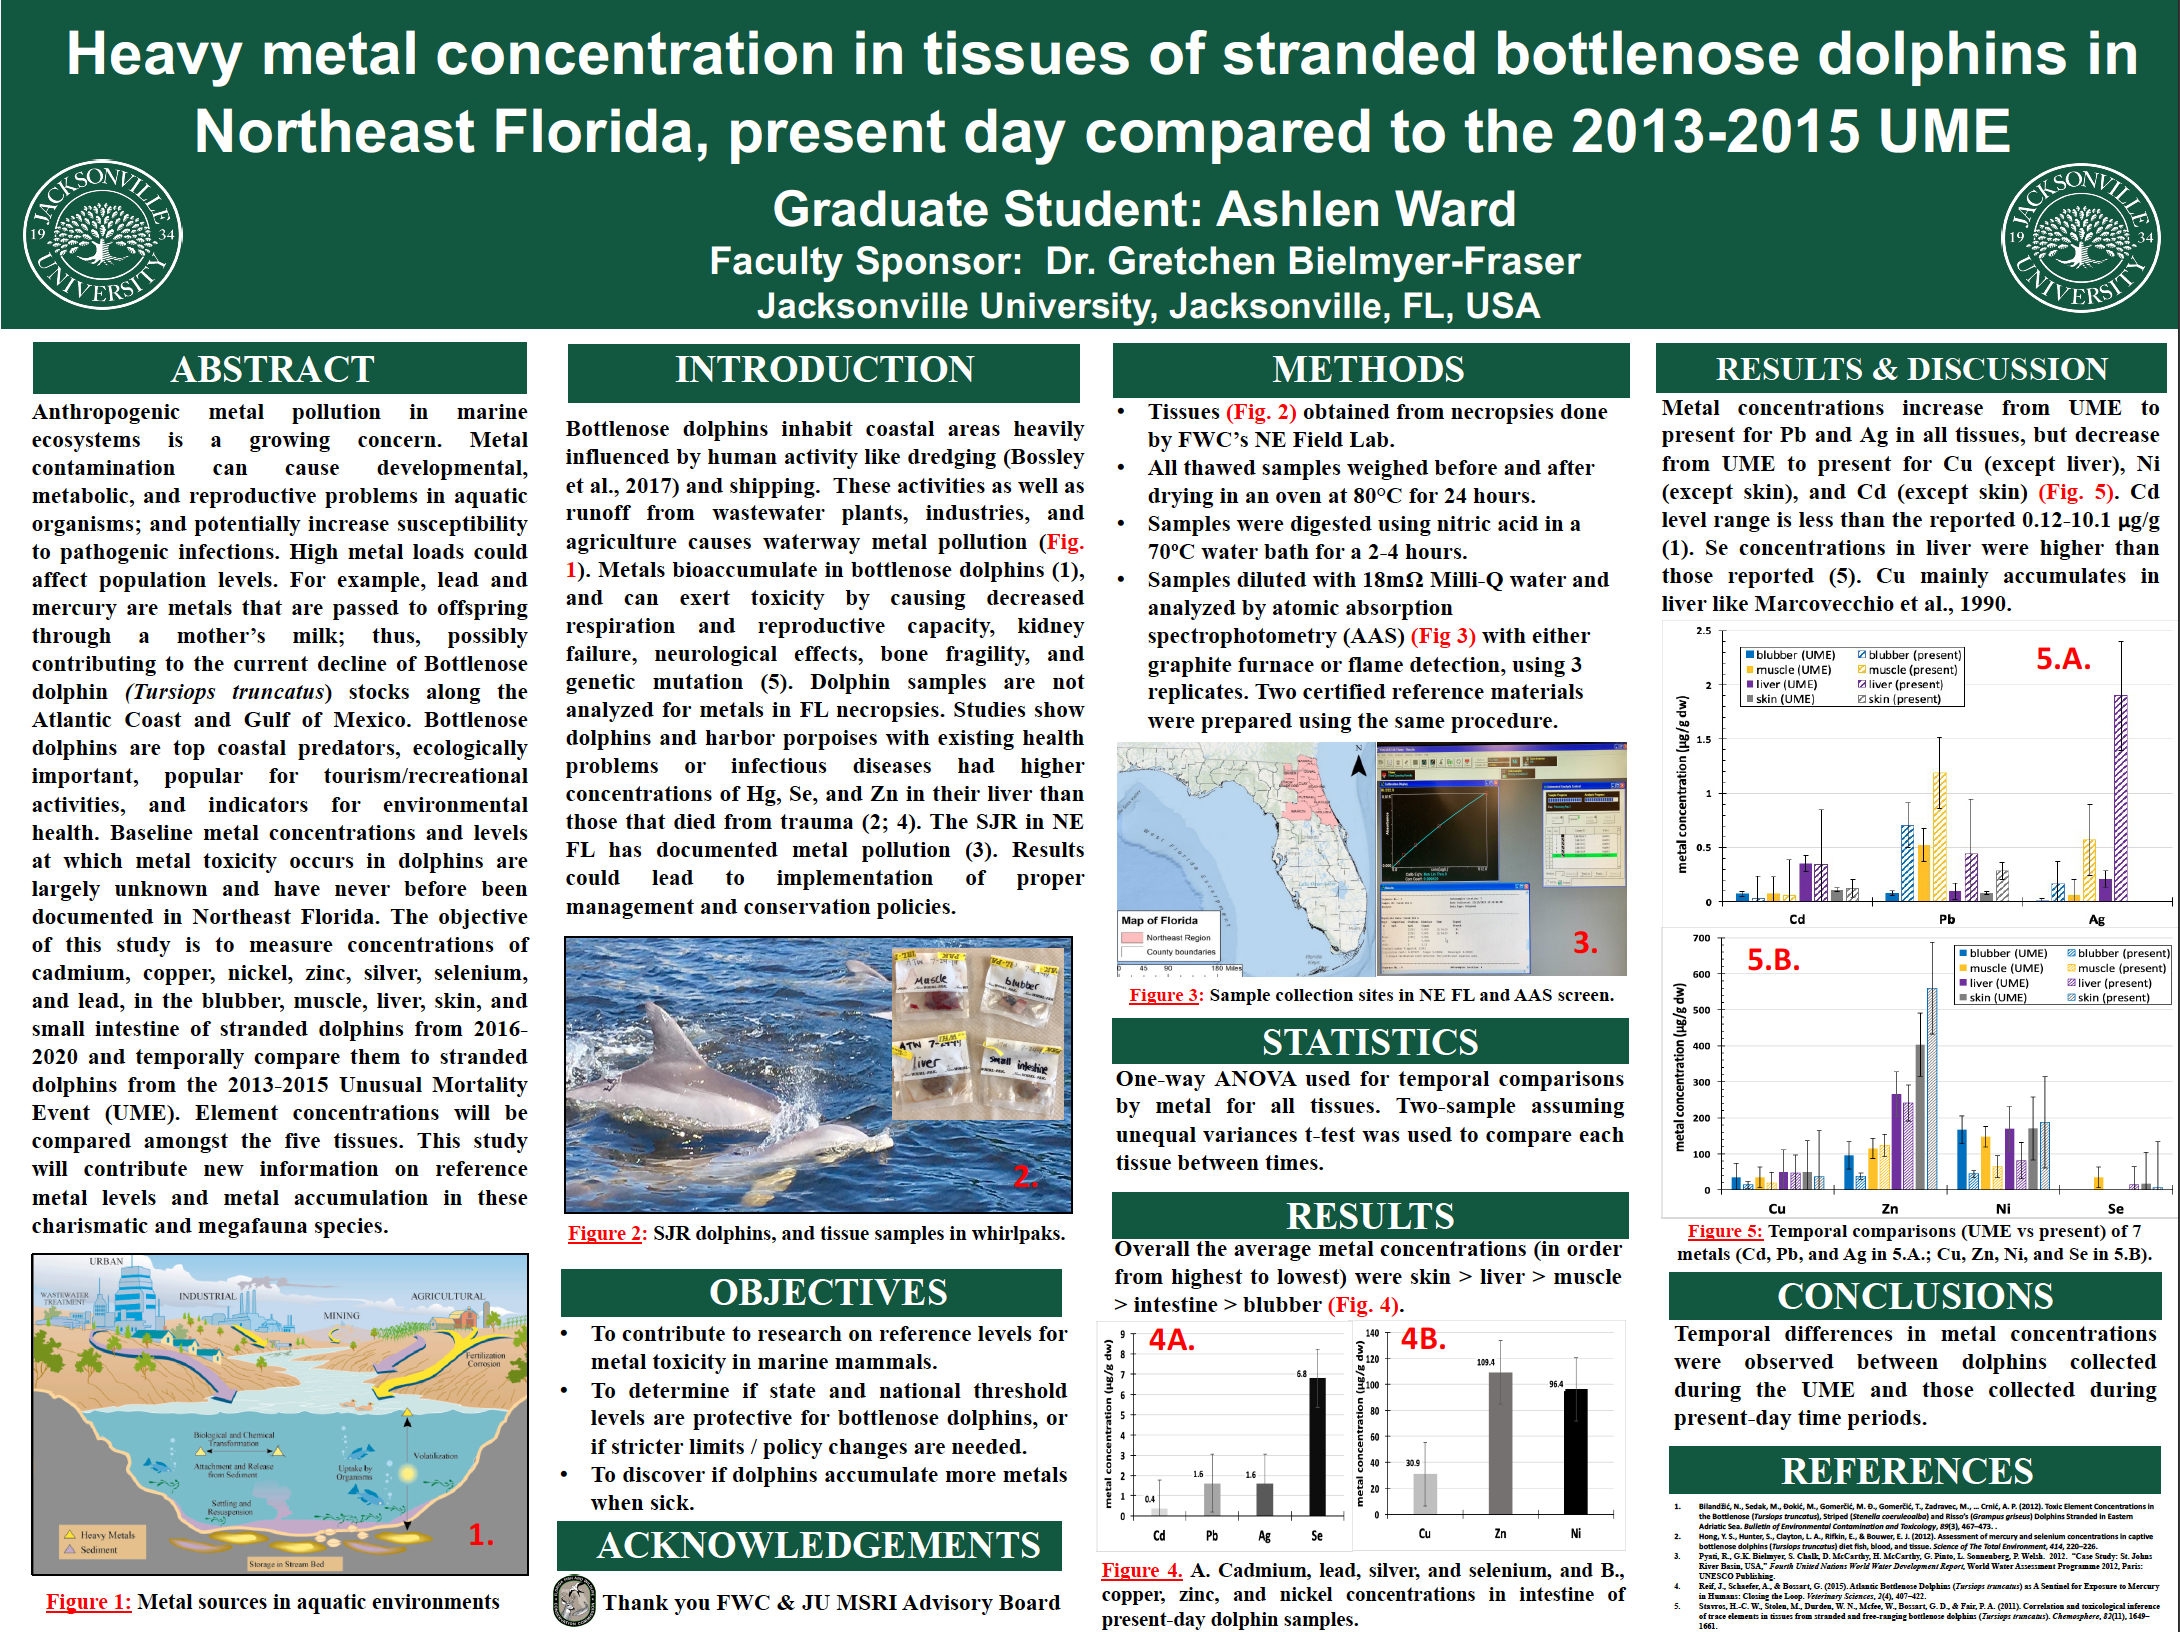 Showcase Image for Heavy metal concentration in tissues of stranded bottlenose dolphins in Northeast Florida, present day (2016-2021) compared to the 2013-2015 UME